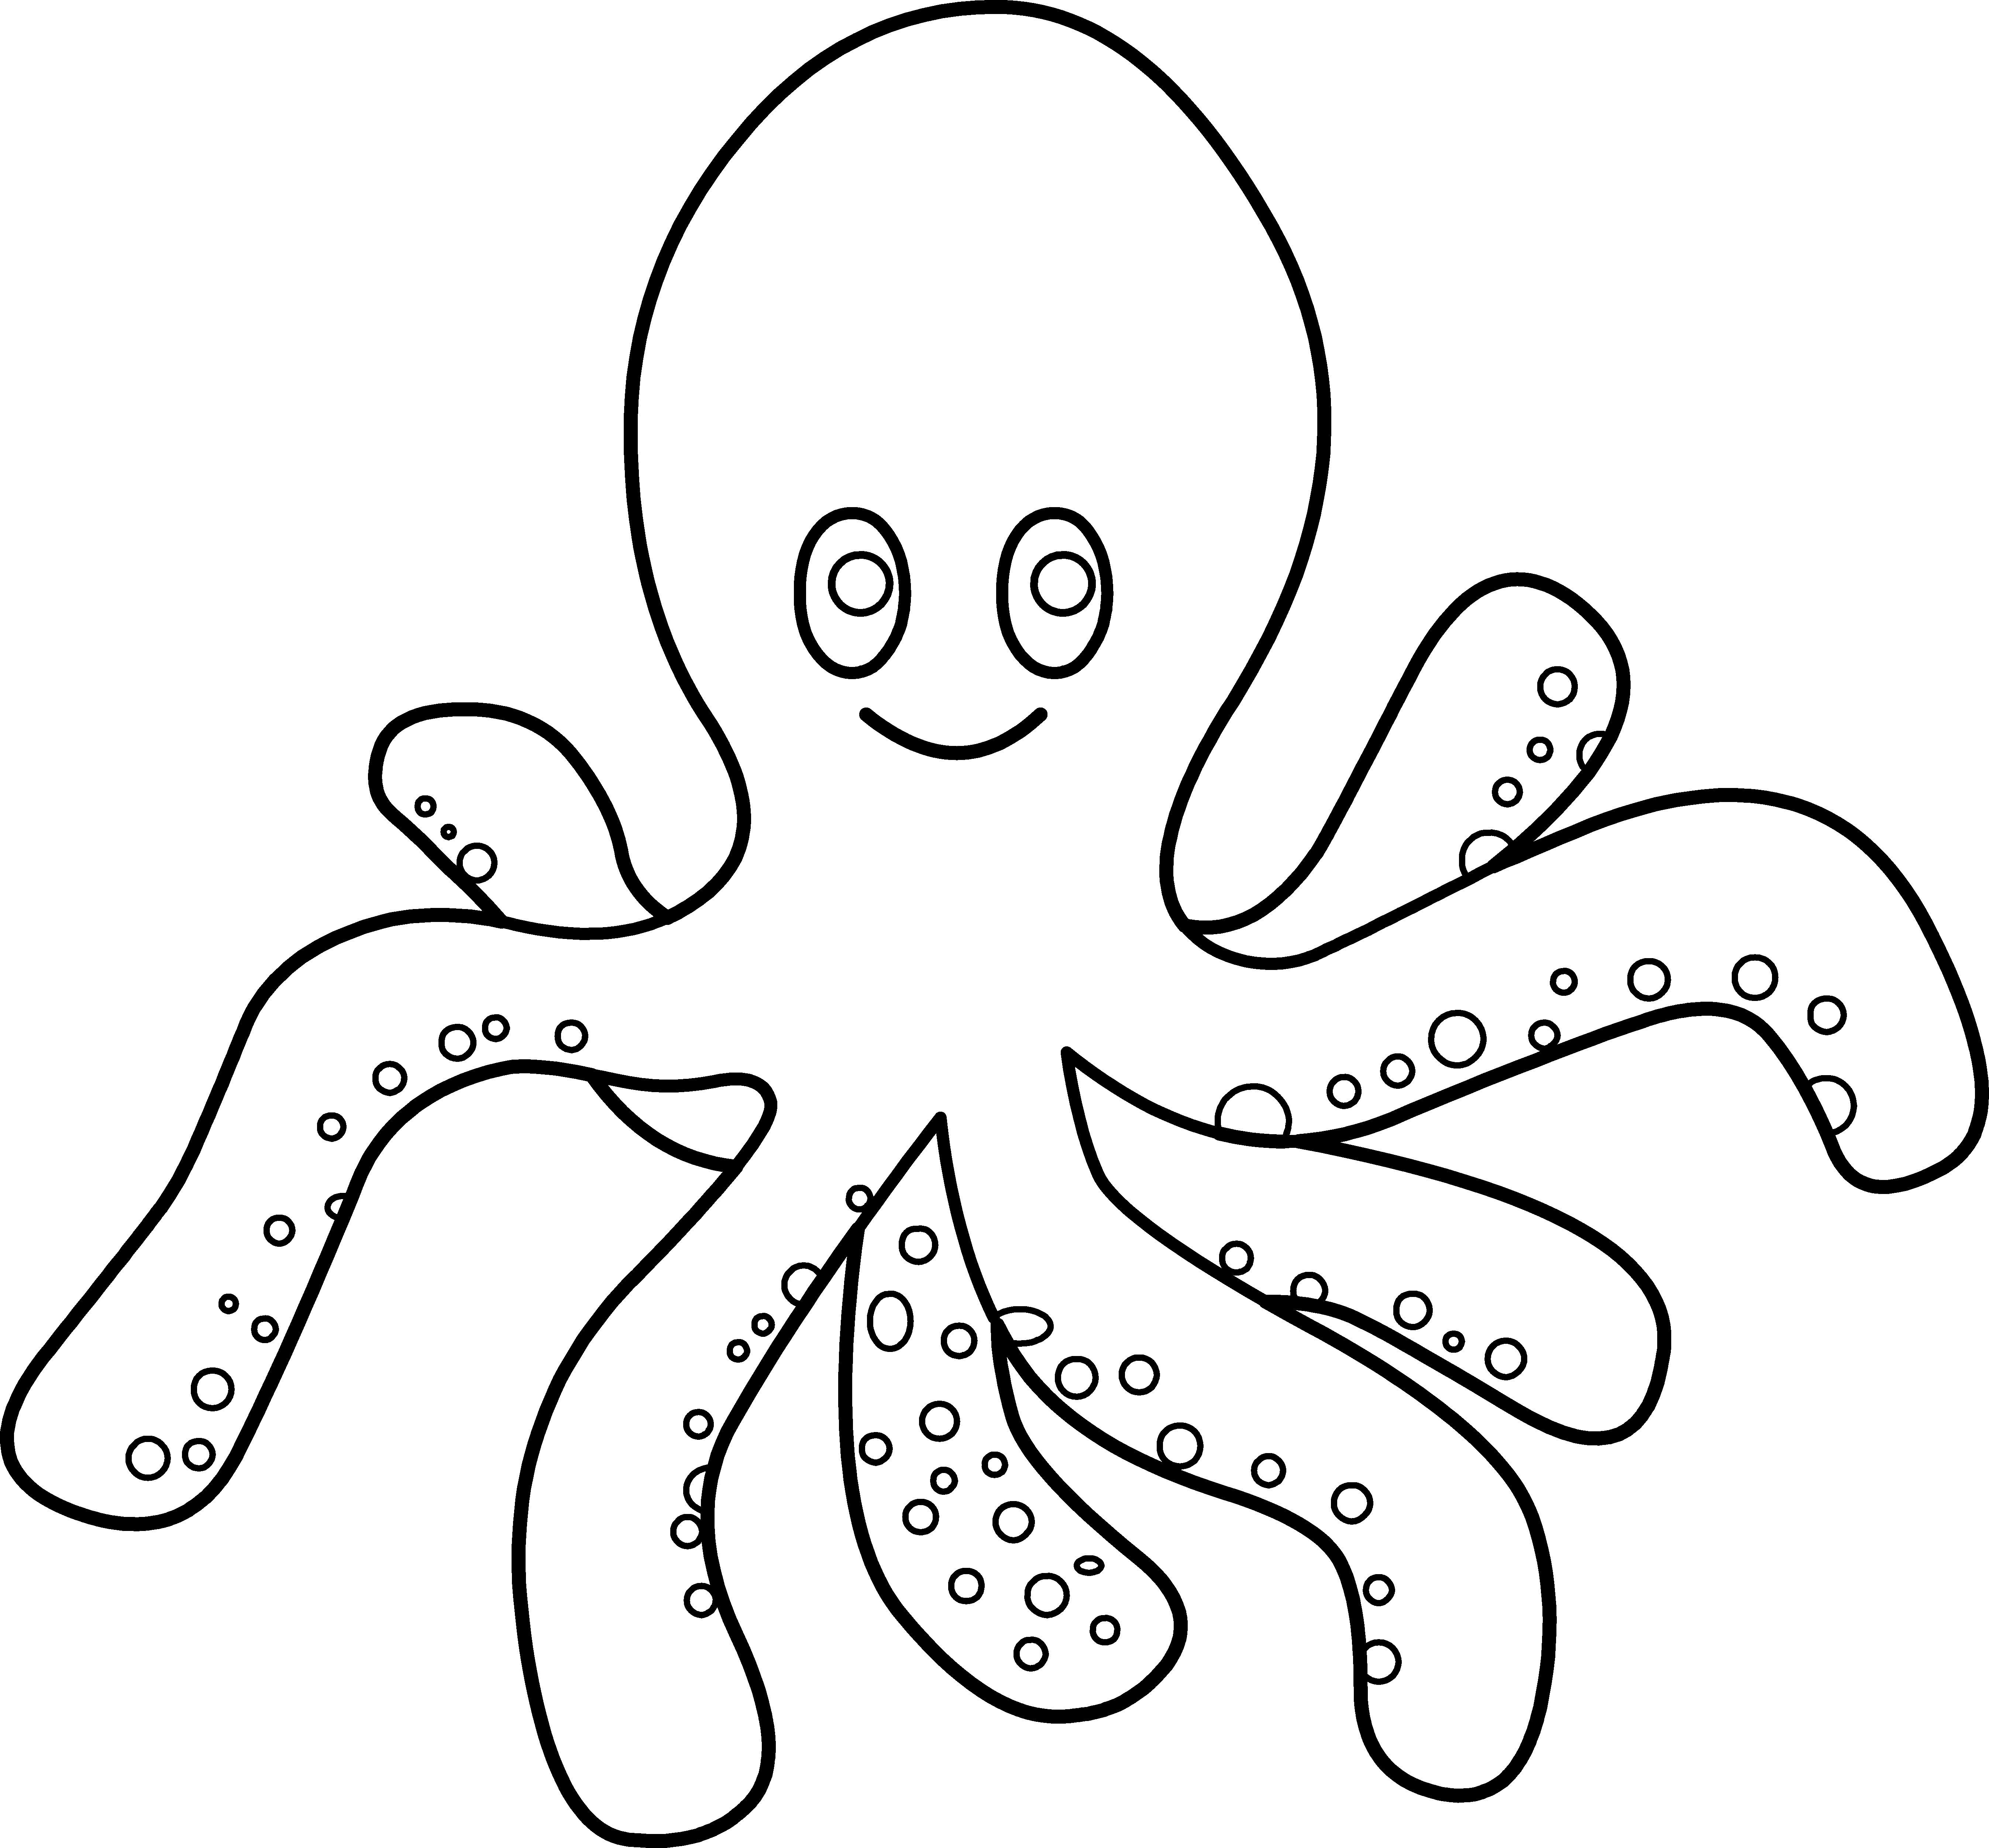 Octopus coloring page free clip art